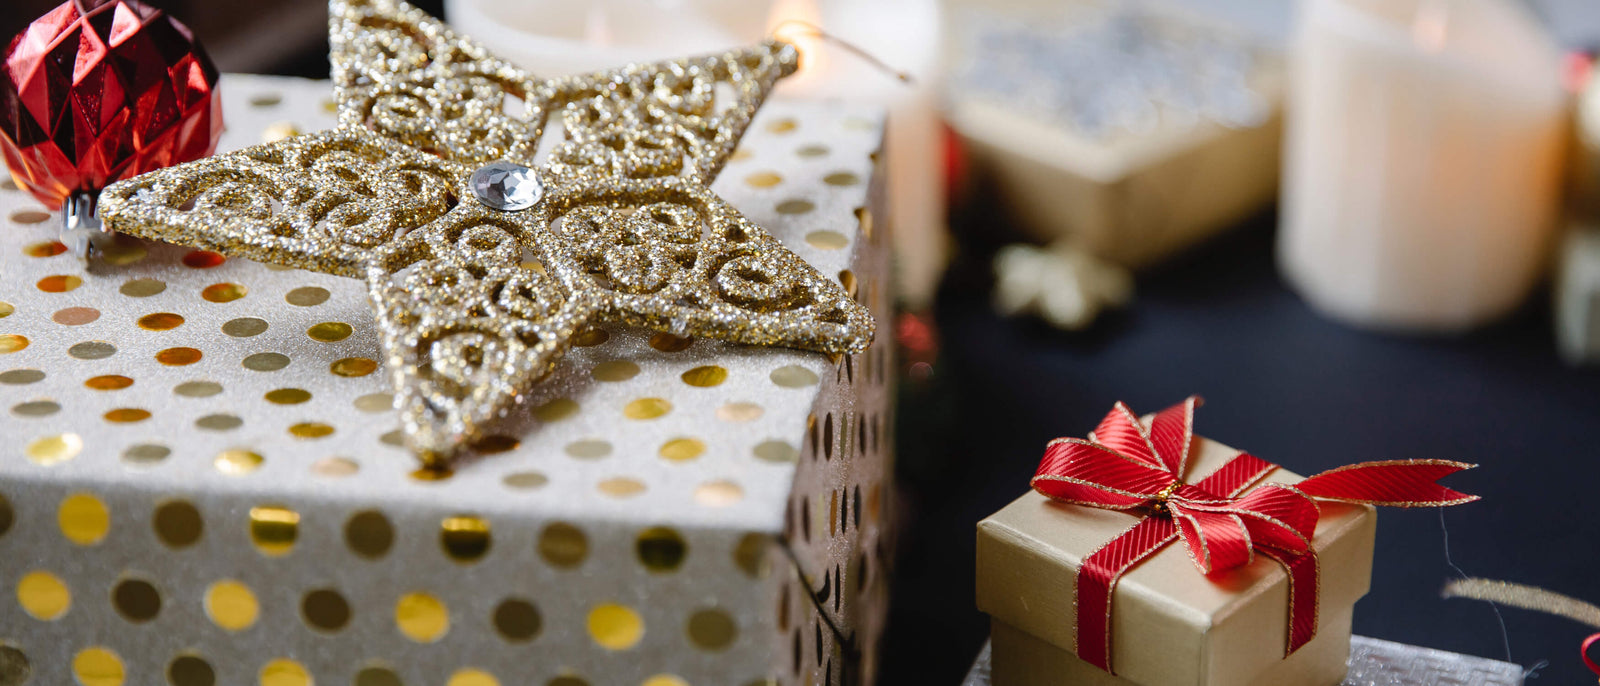 33 DIY Christmas Gifts Anyone Can Craft To Make Christmas Extra Special